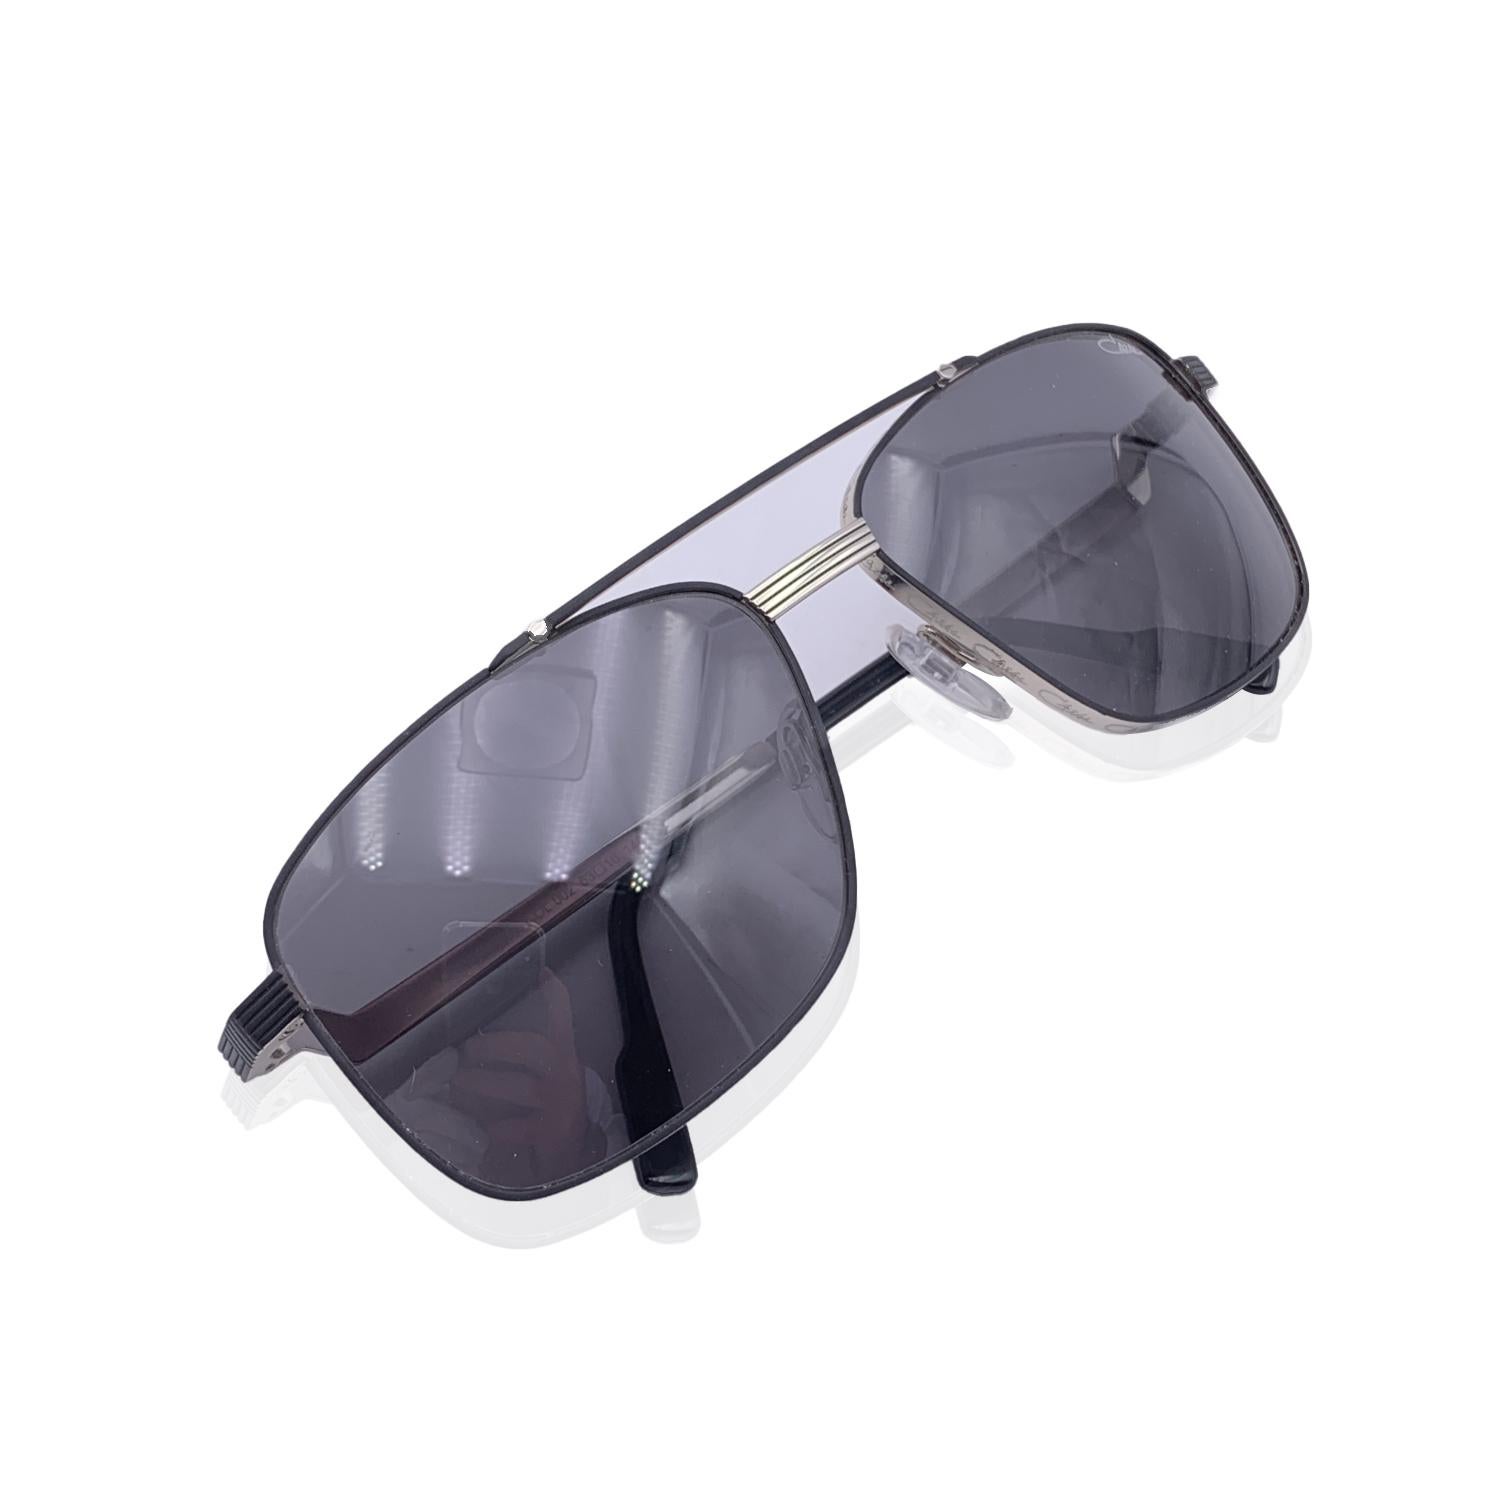 Beautiful sunglasses by Cazal, Mod. 9101 Col. 002. Silver metal and black metal frame, squared aviator design, with Cazal signatures embossed around the frame.Cazal logo on temples. Grey 100% UV protection lenses. Made in